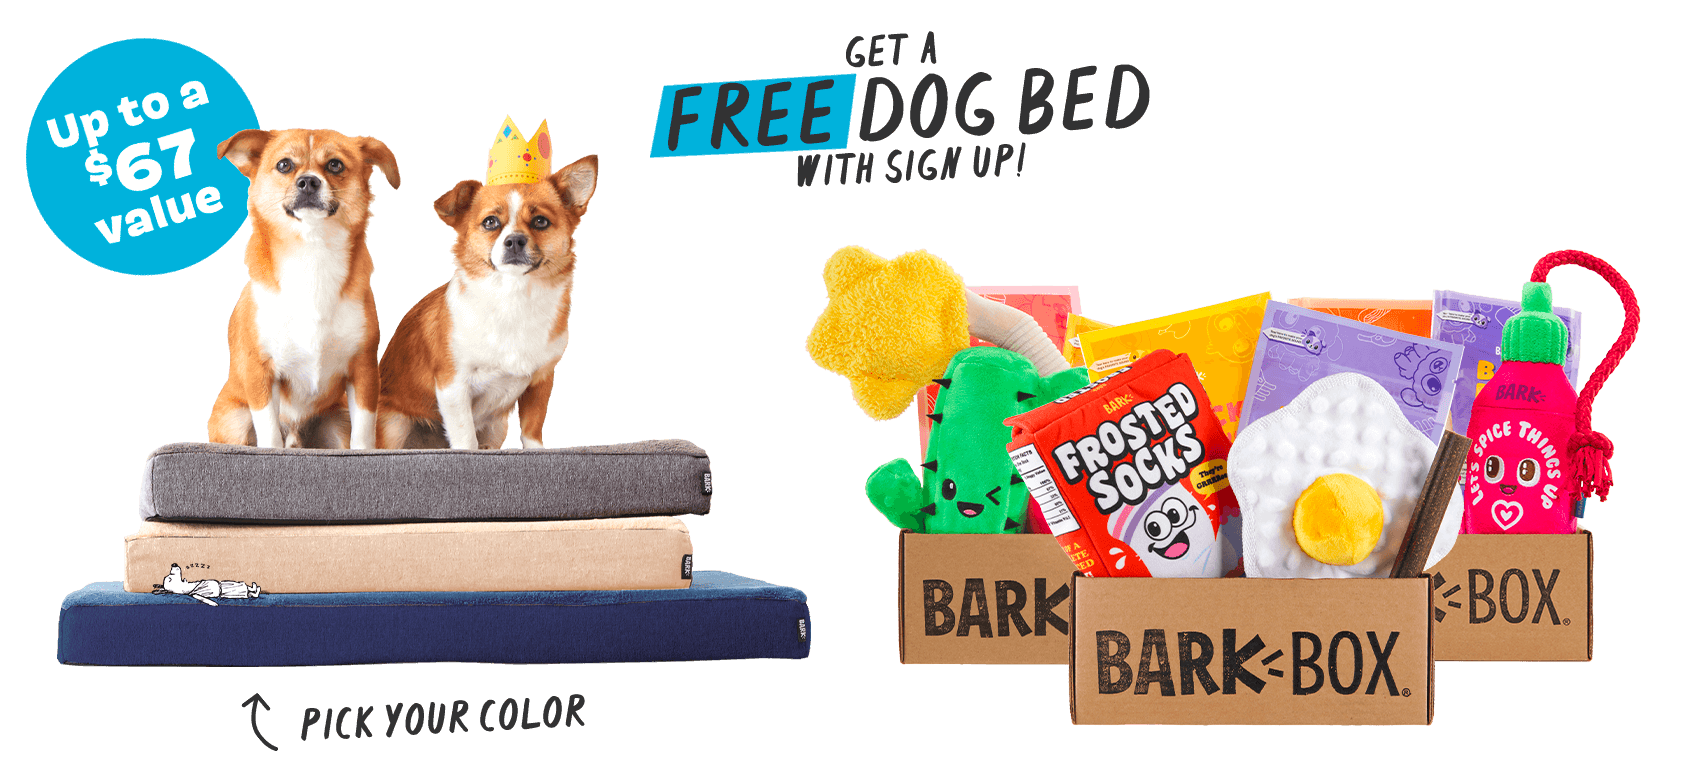 Barkbox – FREE Dog Bed with Multi-Month Subscription!